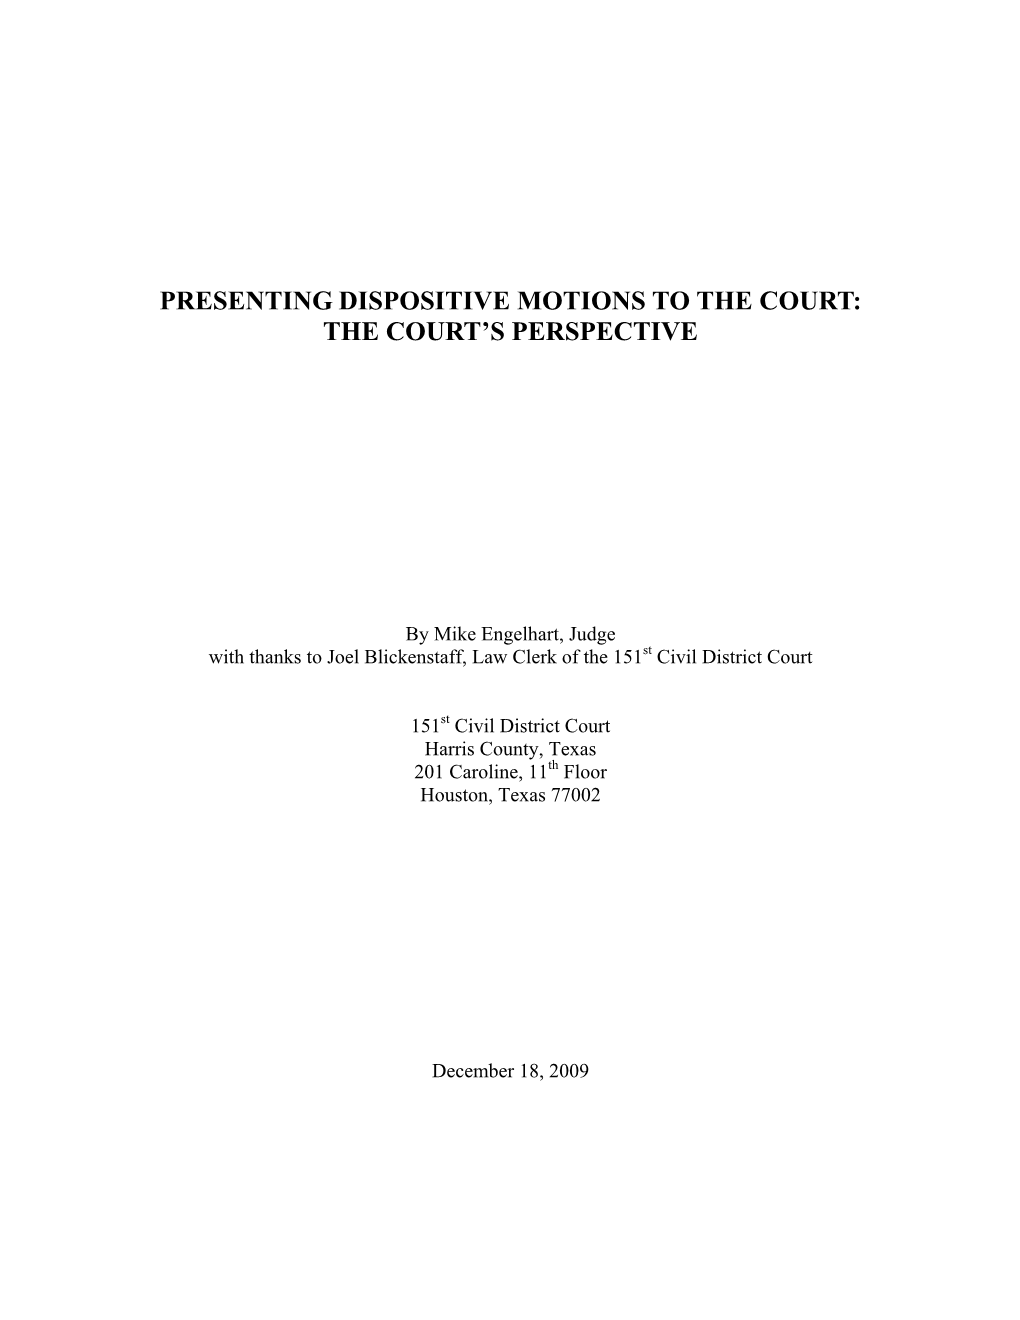 Presenting Dispositive Motions to the Court: the Court’S Perspective